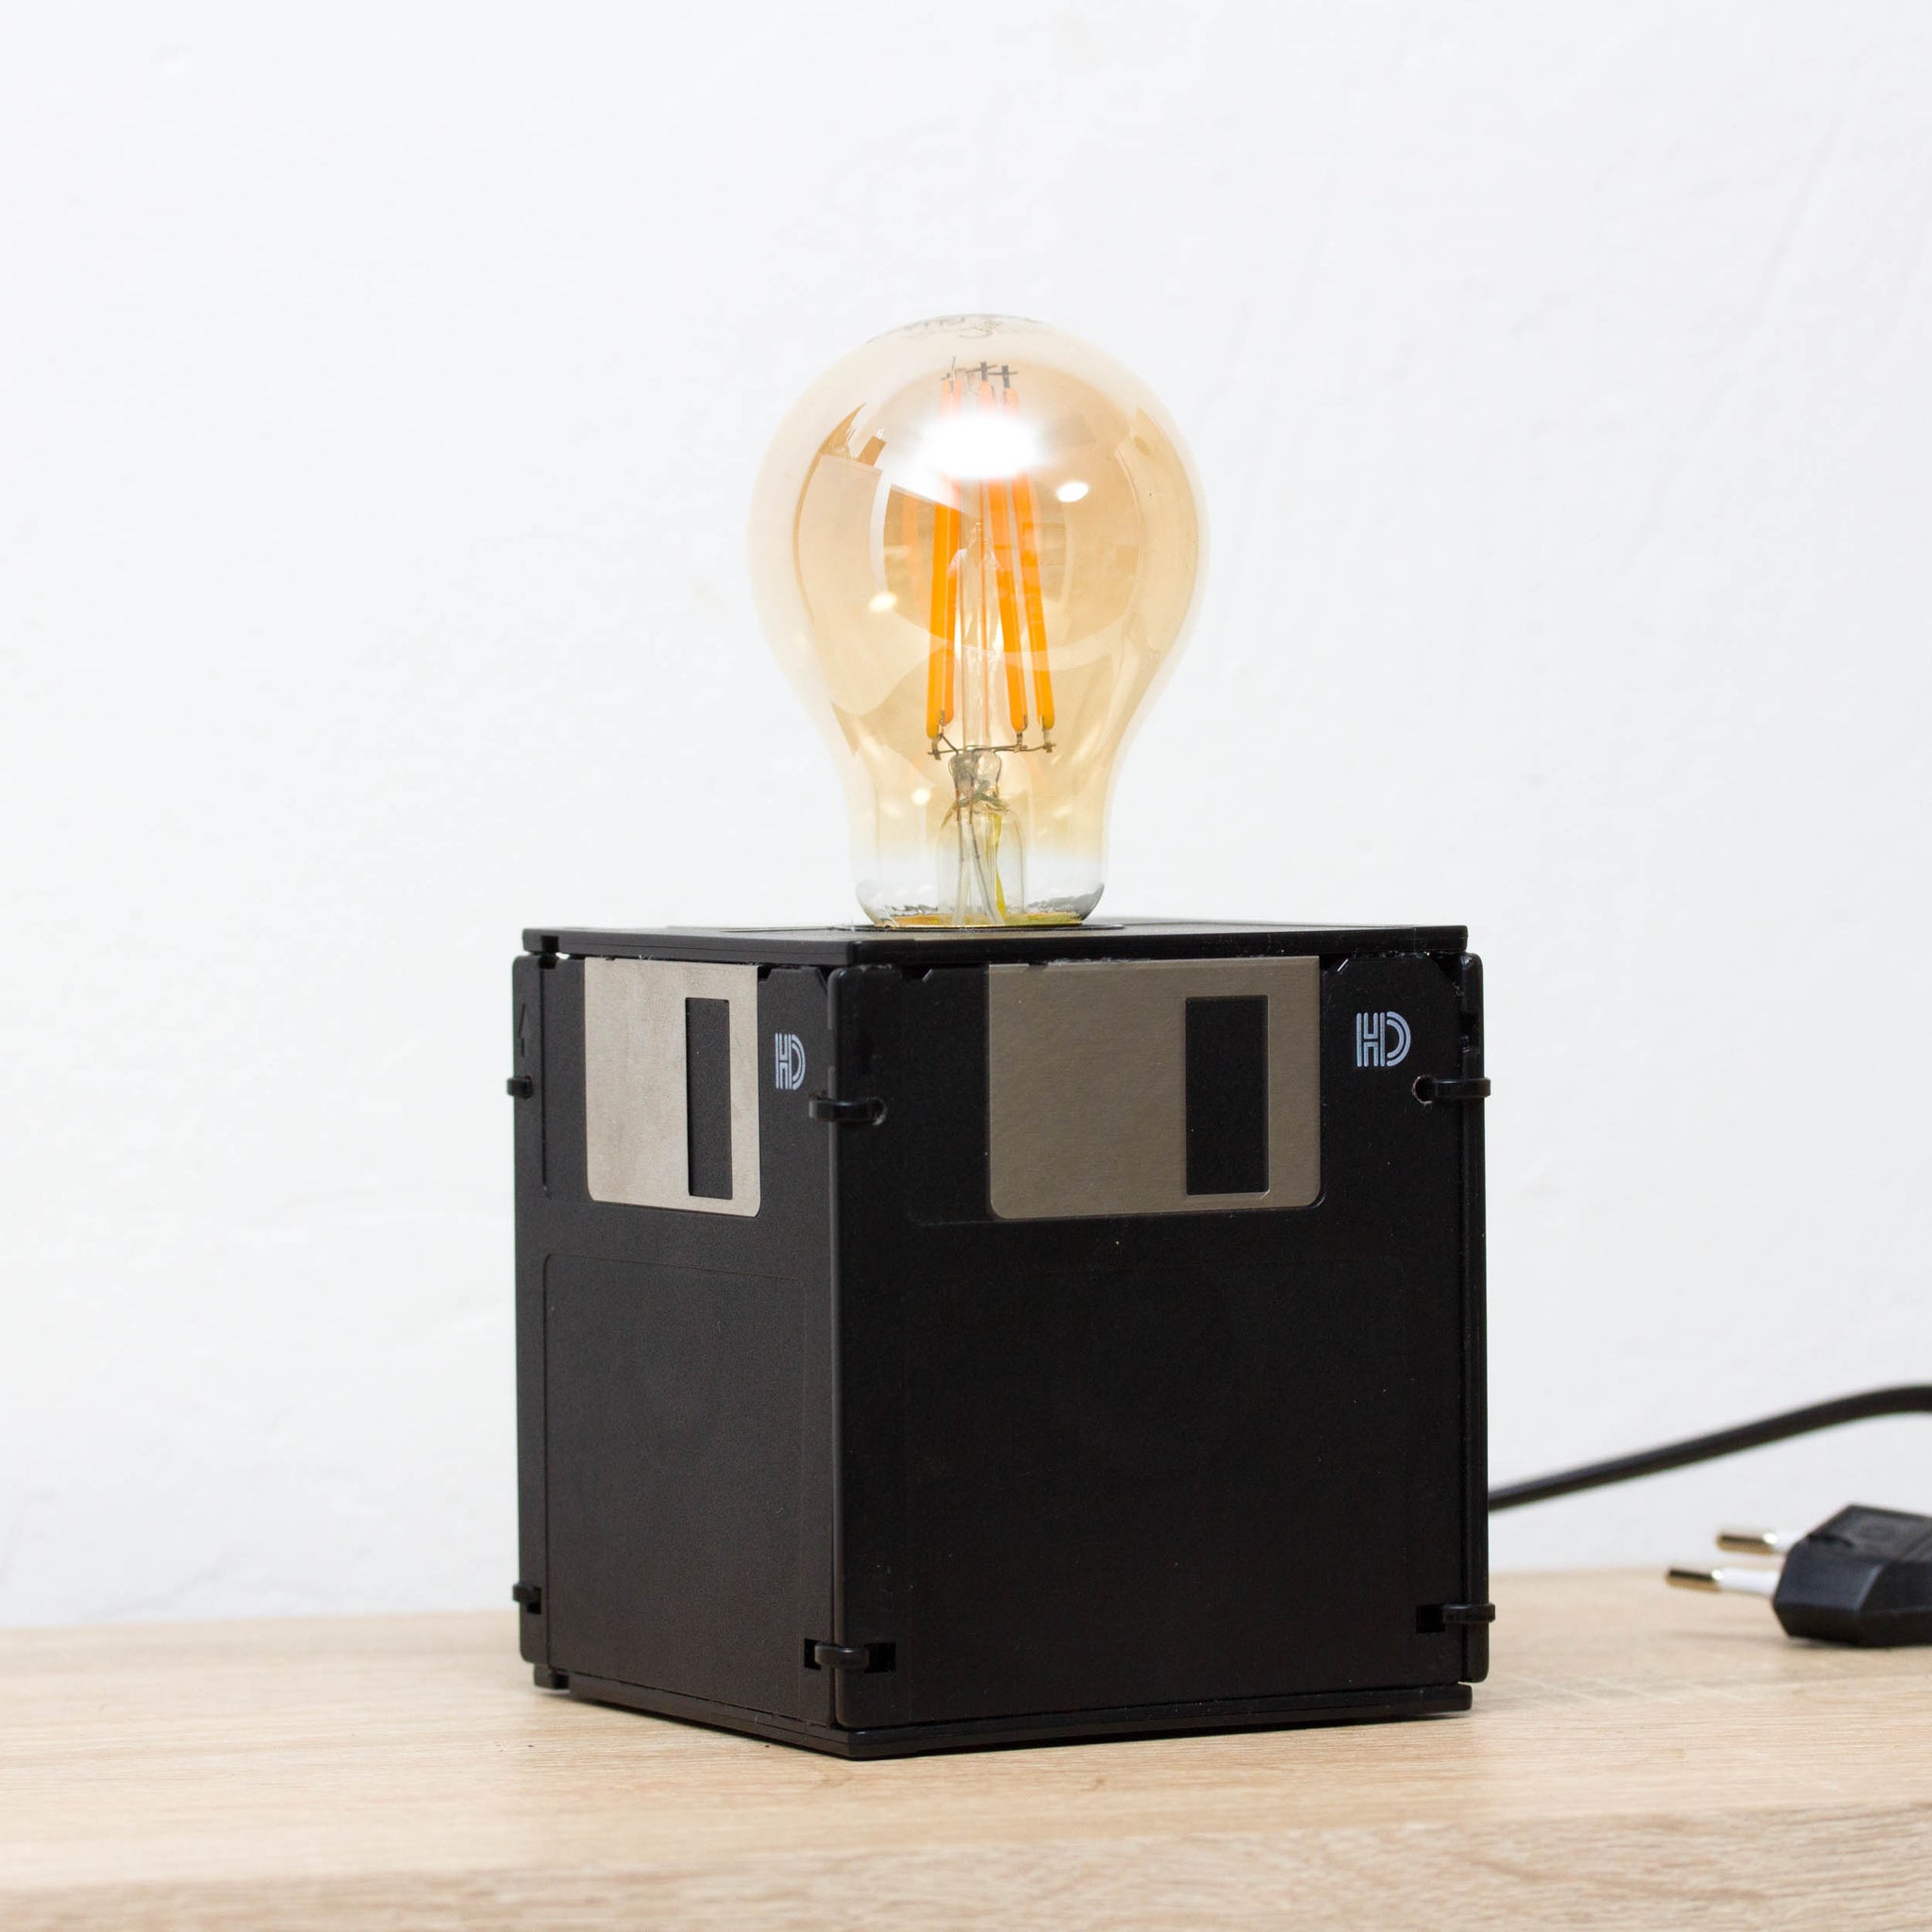 Table lamp made with recycled floppy disks